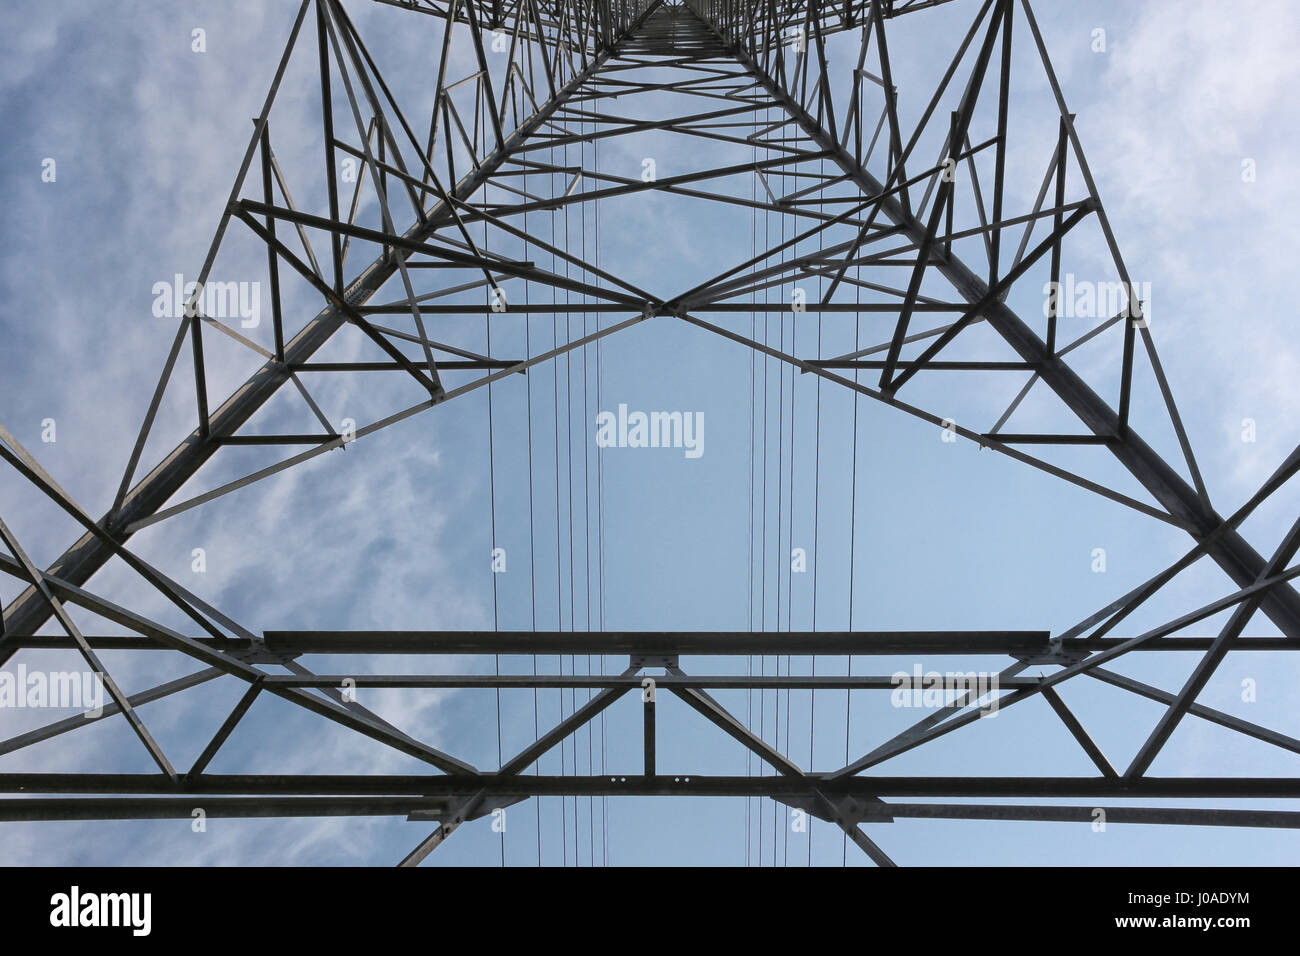 High Voltage Poles in Bottom View. Stock Photo